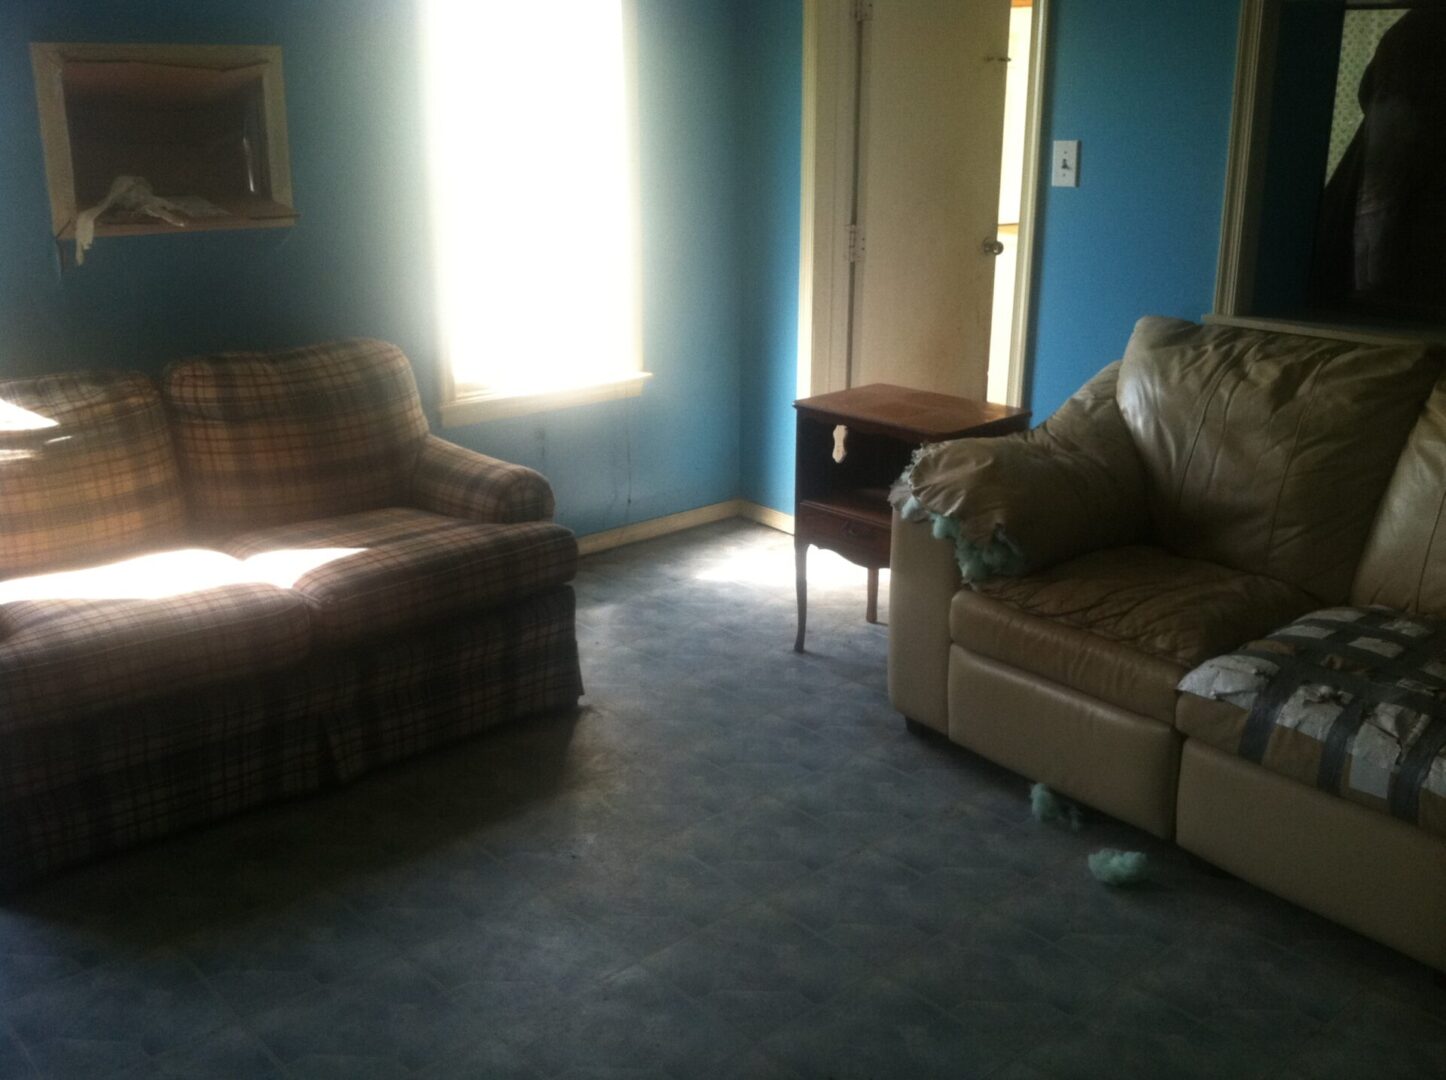 Blue living room interior with a checkered couch and a damaged leather sofa